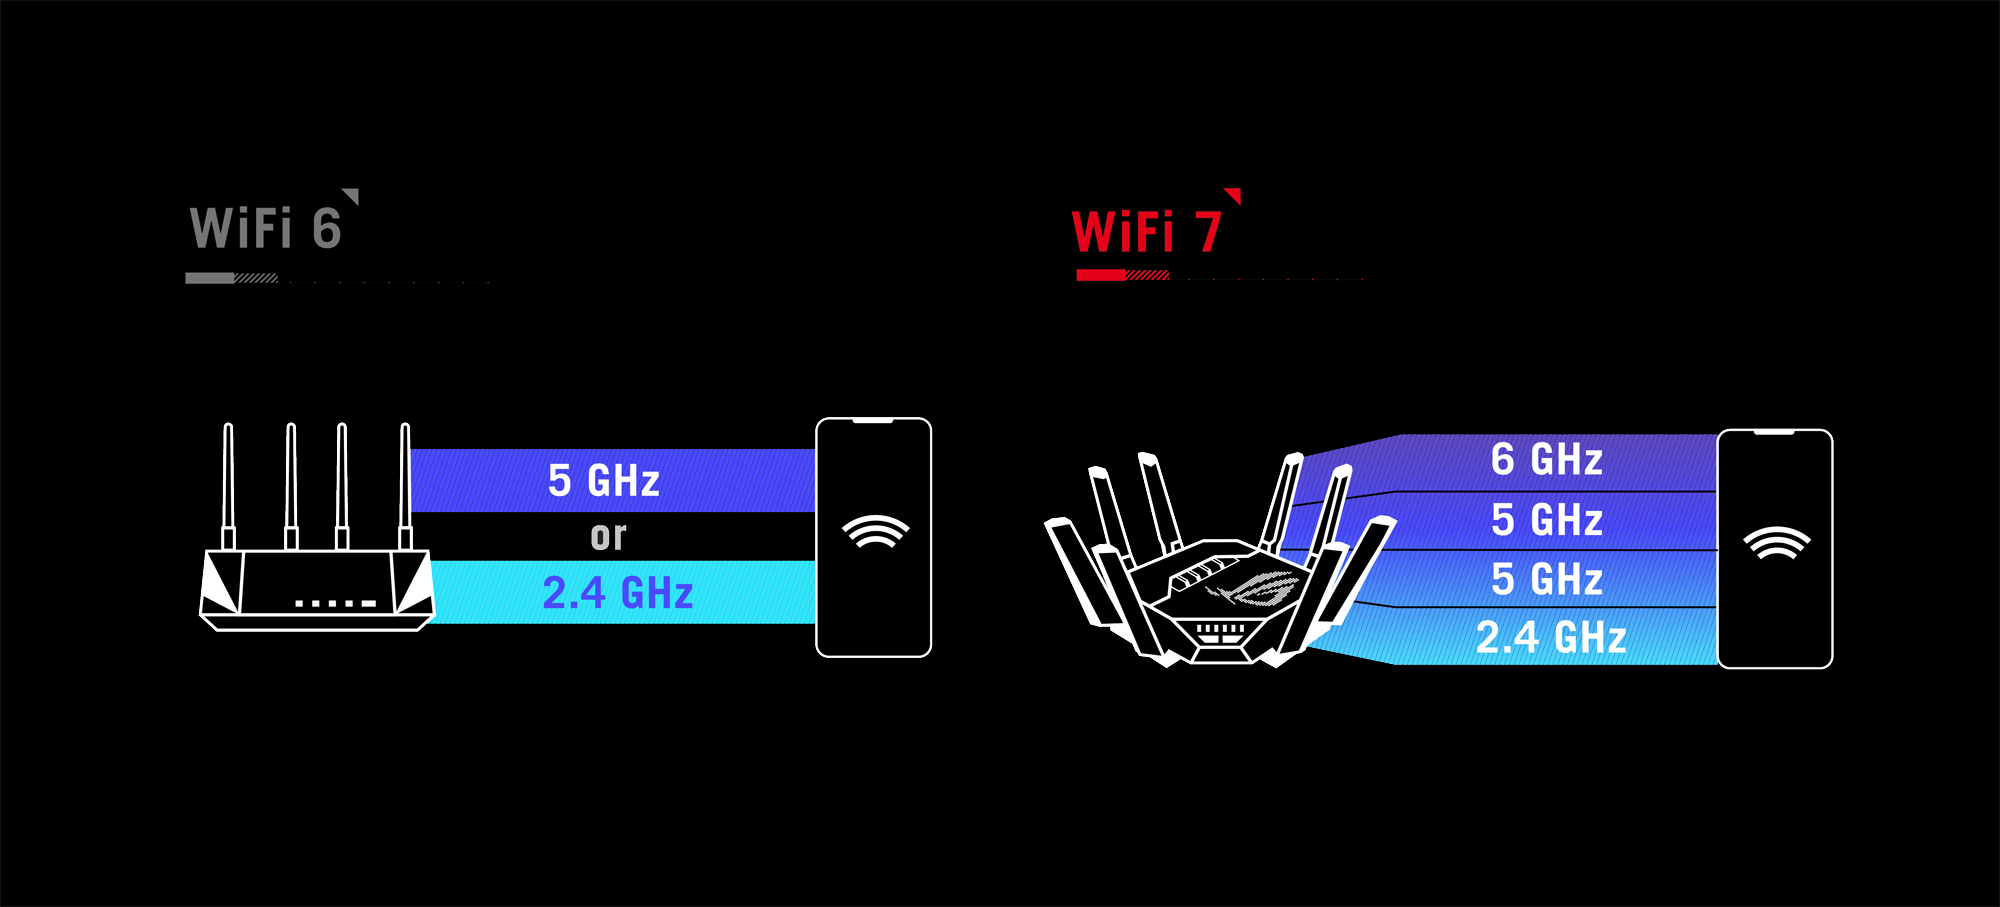 Infographic showing how WiFi 7 devices can use multi-link operation to connect simultaneously across different bands and channels.